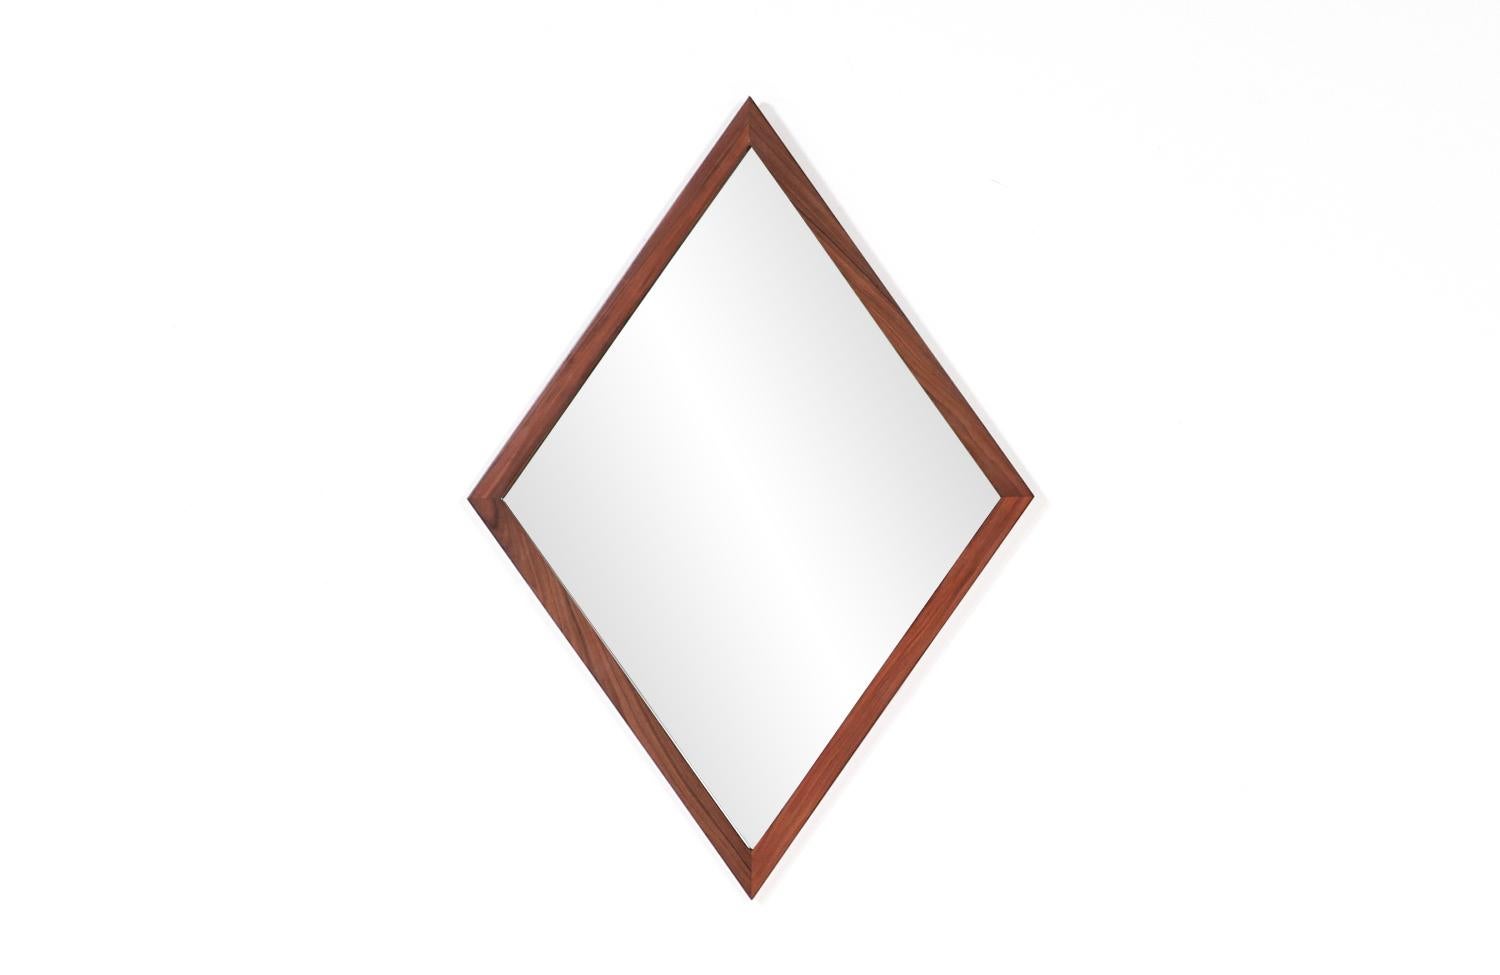 Mid-Century Modern diamond shape rosewood mirror.

________________________________________

Transforming a piece of Mid-Century Modern furniture is like bringing history back to life, and we take this journey with passion and precision. With over